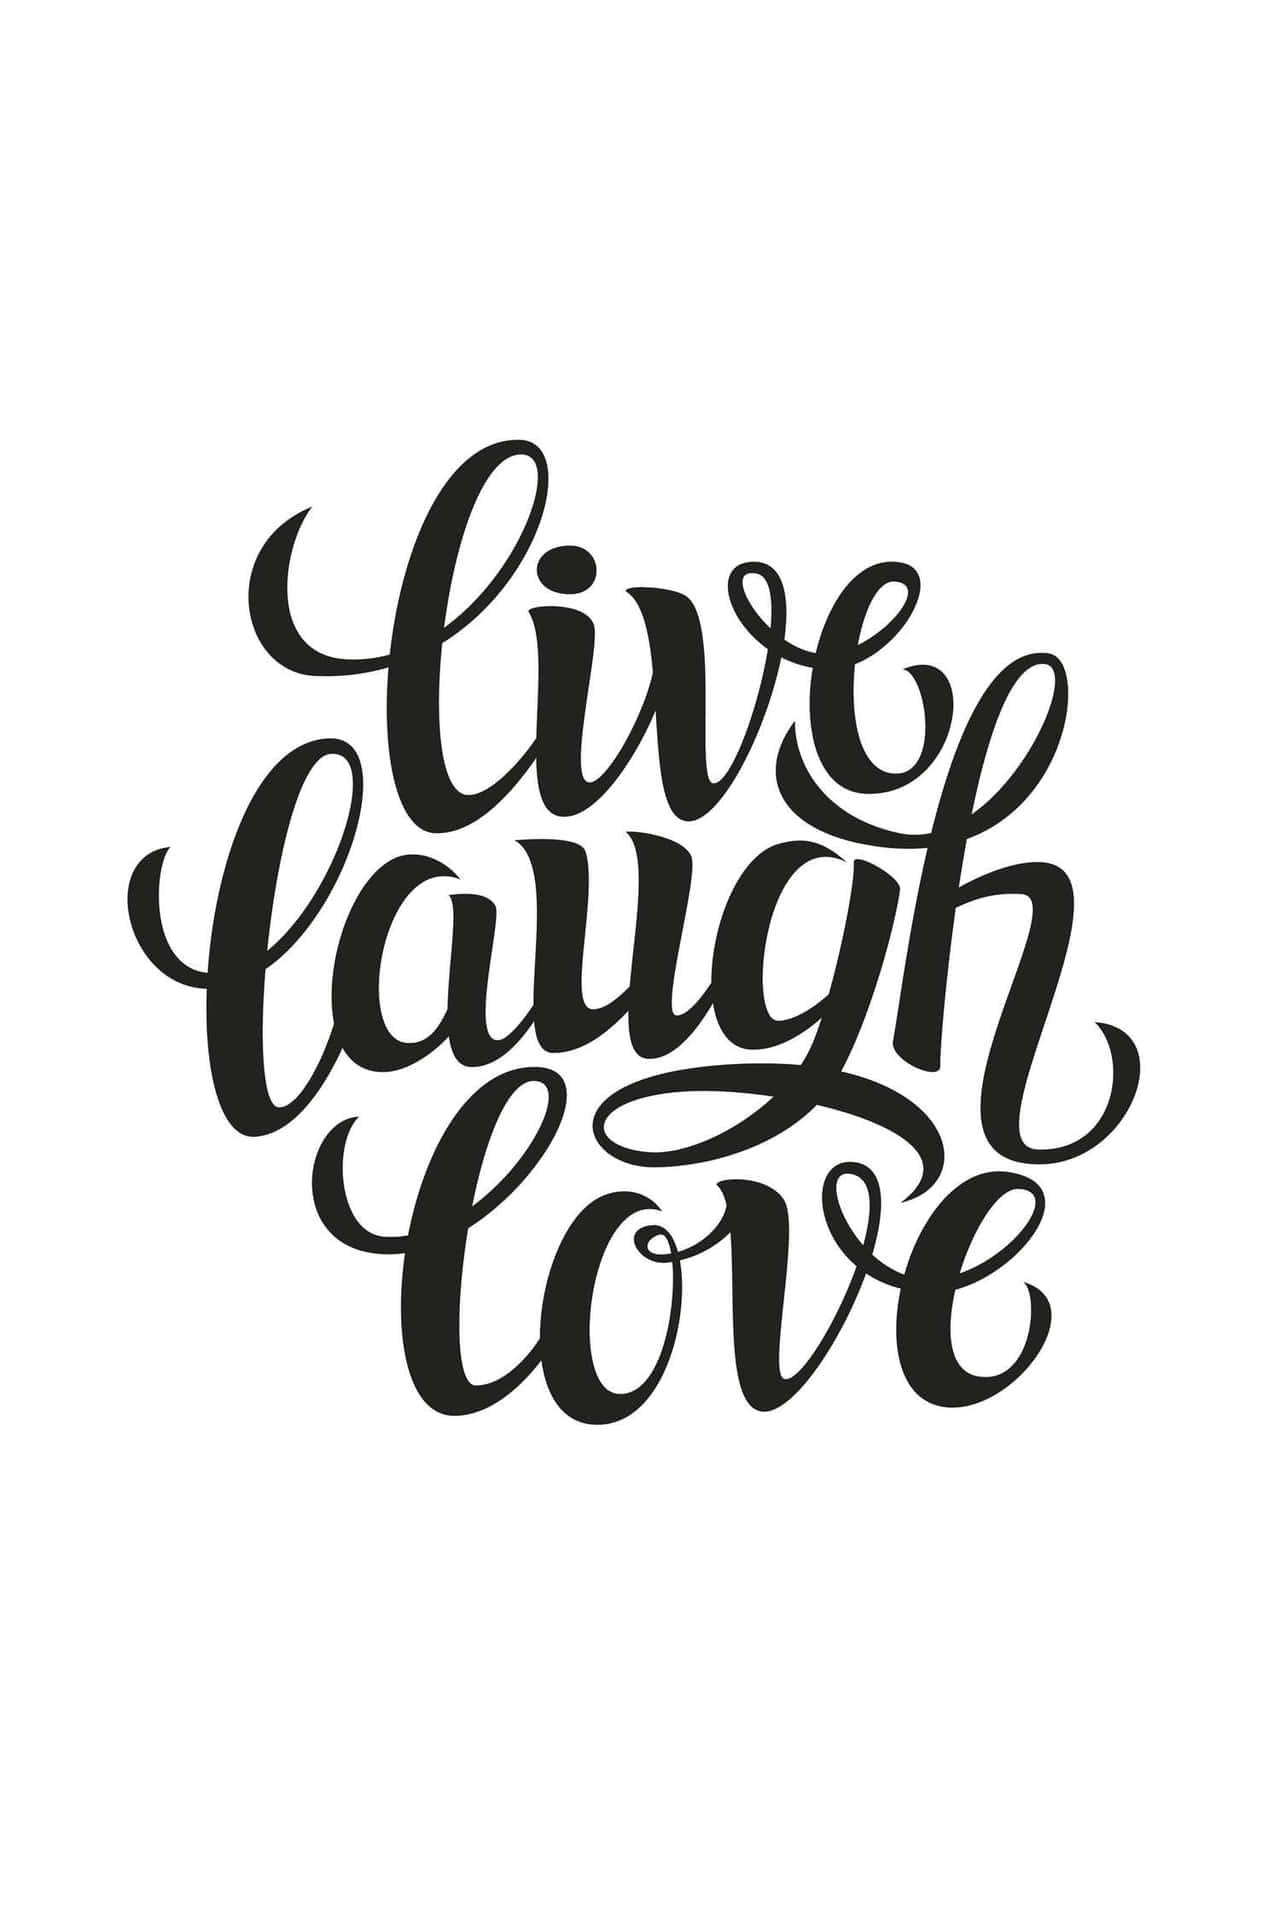 Make every moment count&find joy in Finding Love, Happiness and Laughter Wallpaper